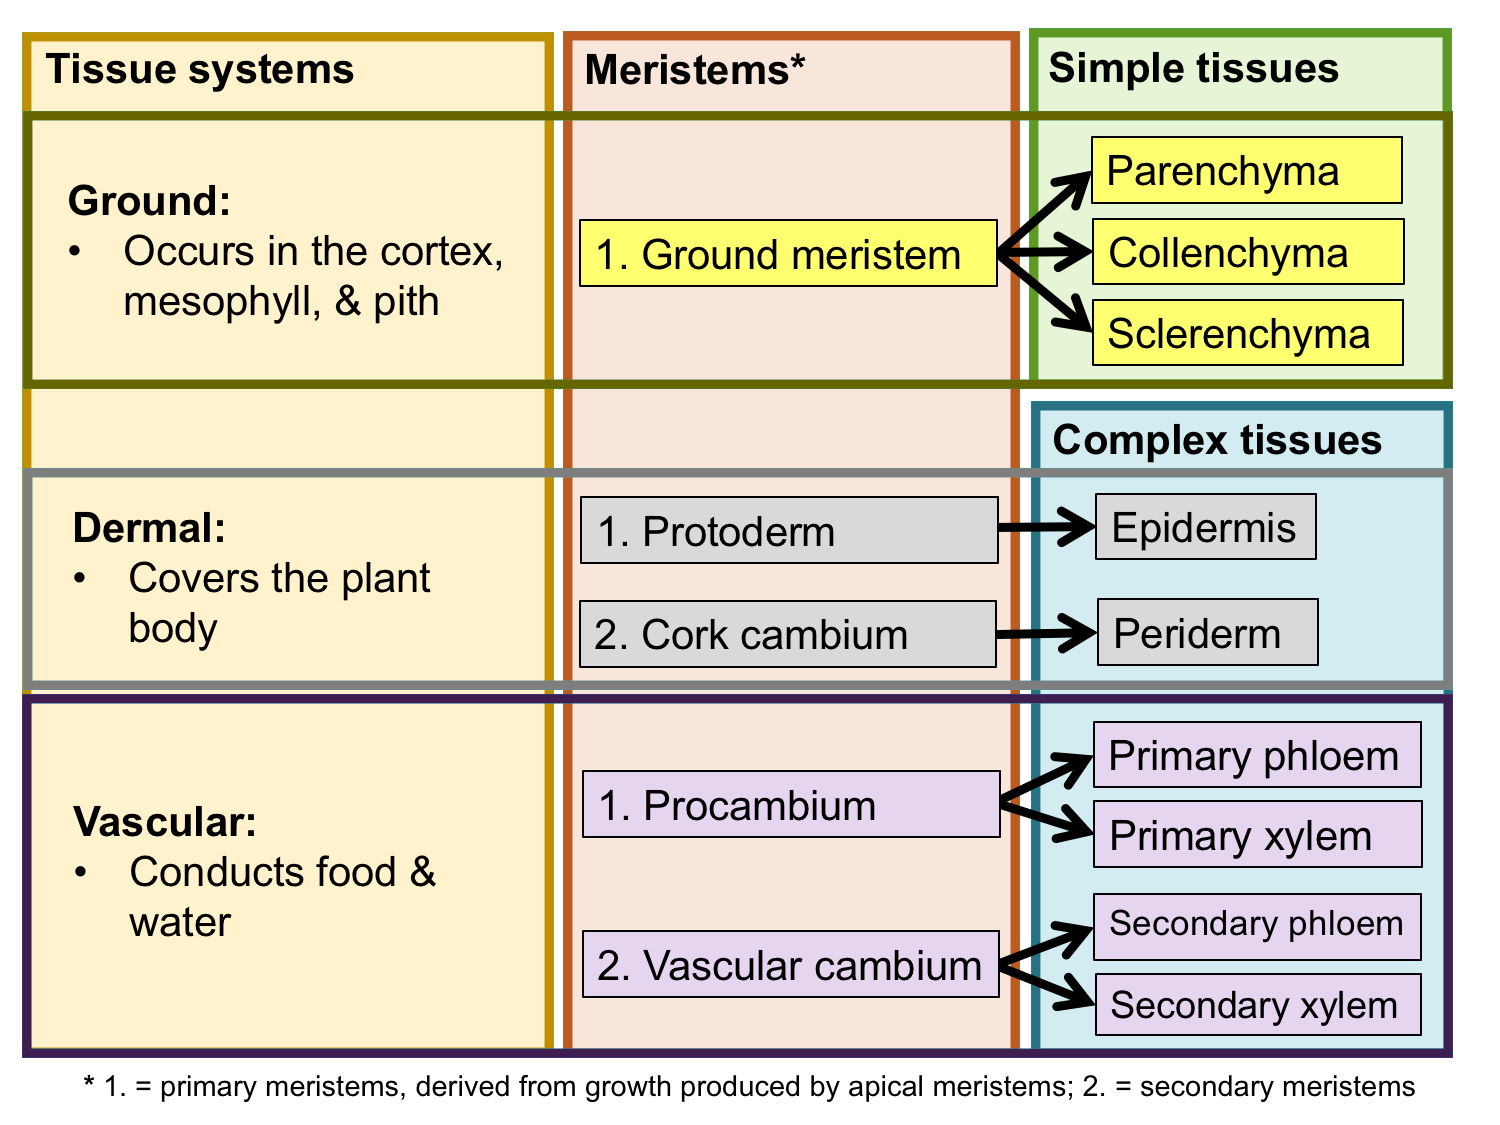 Chart summarizing the relationship between tissue systems, meristems, and tissues.